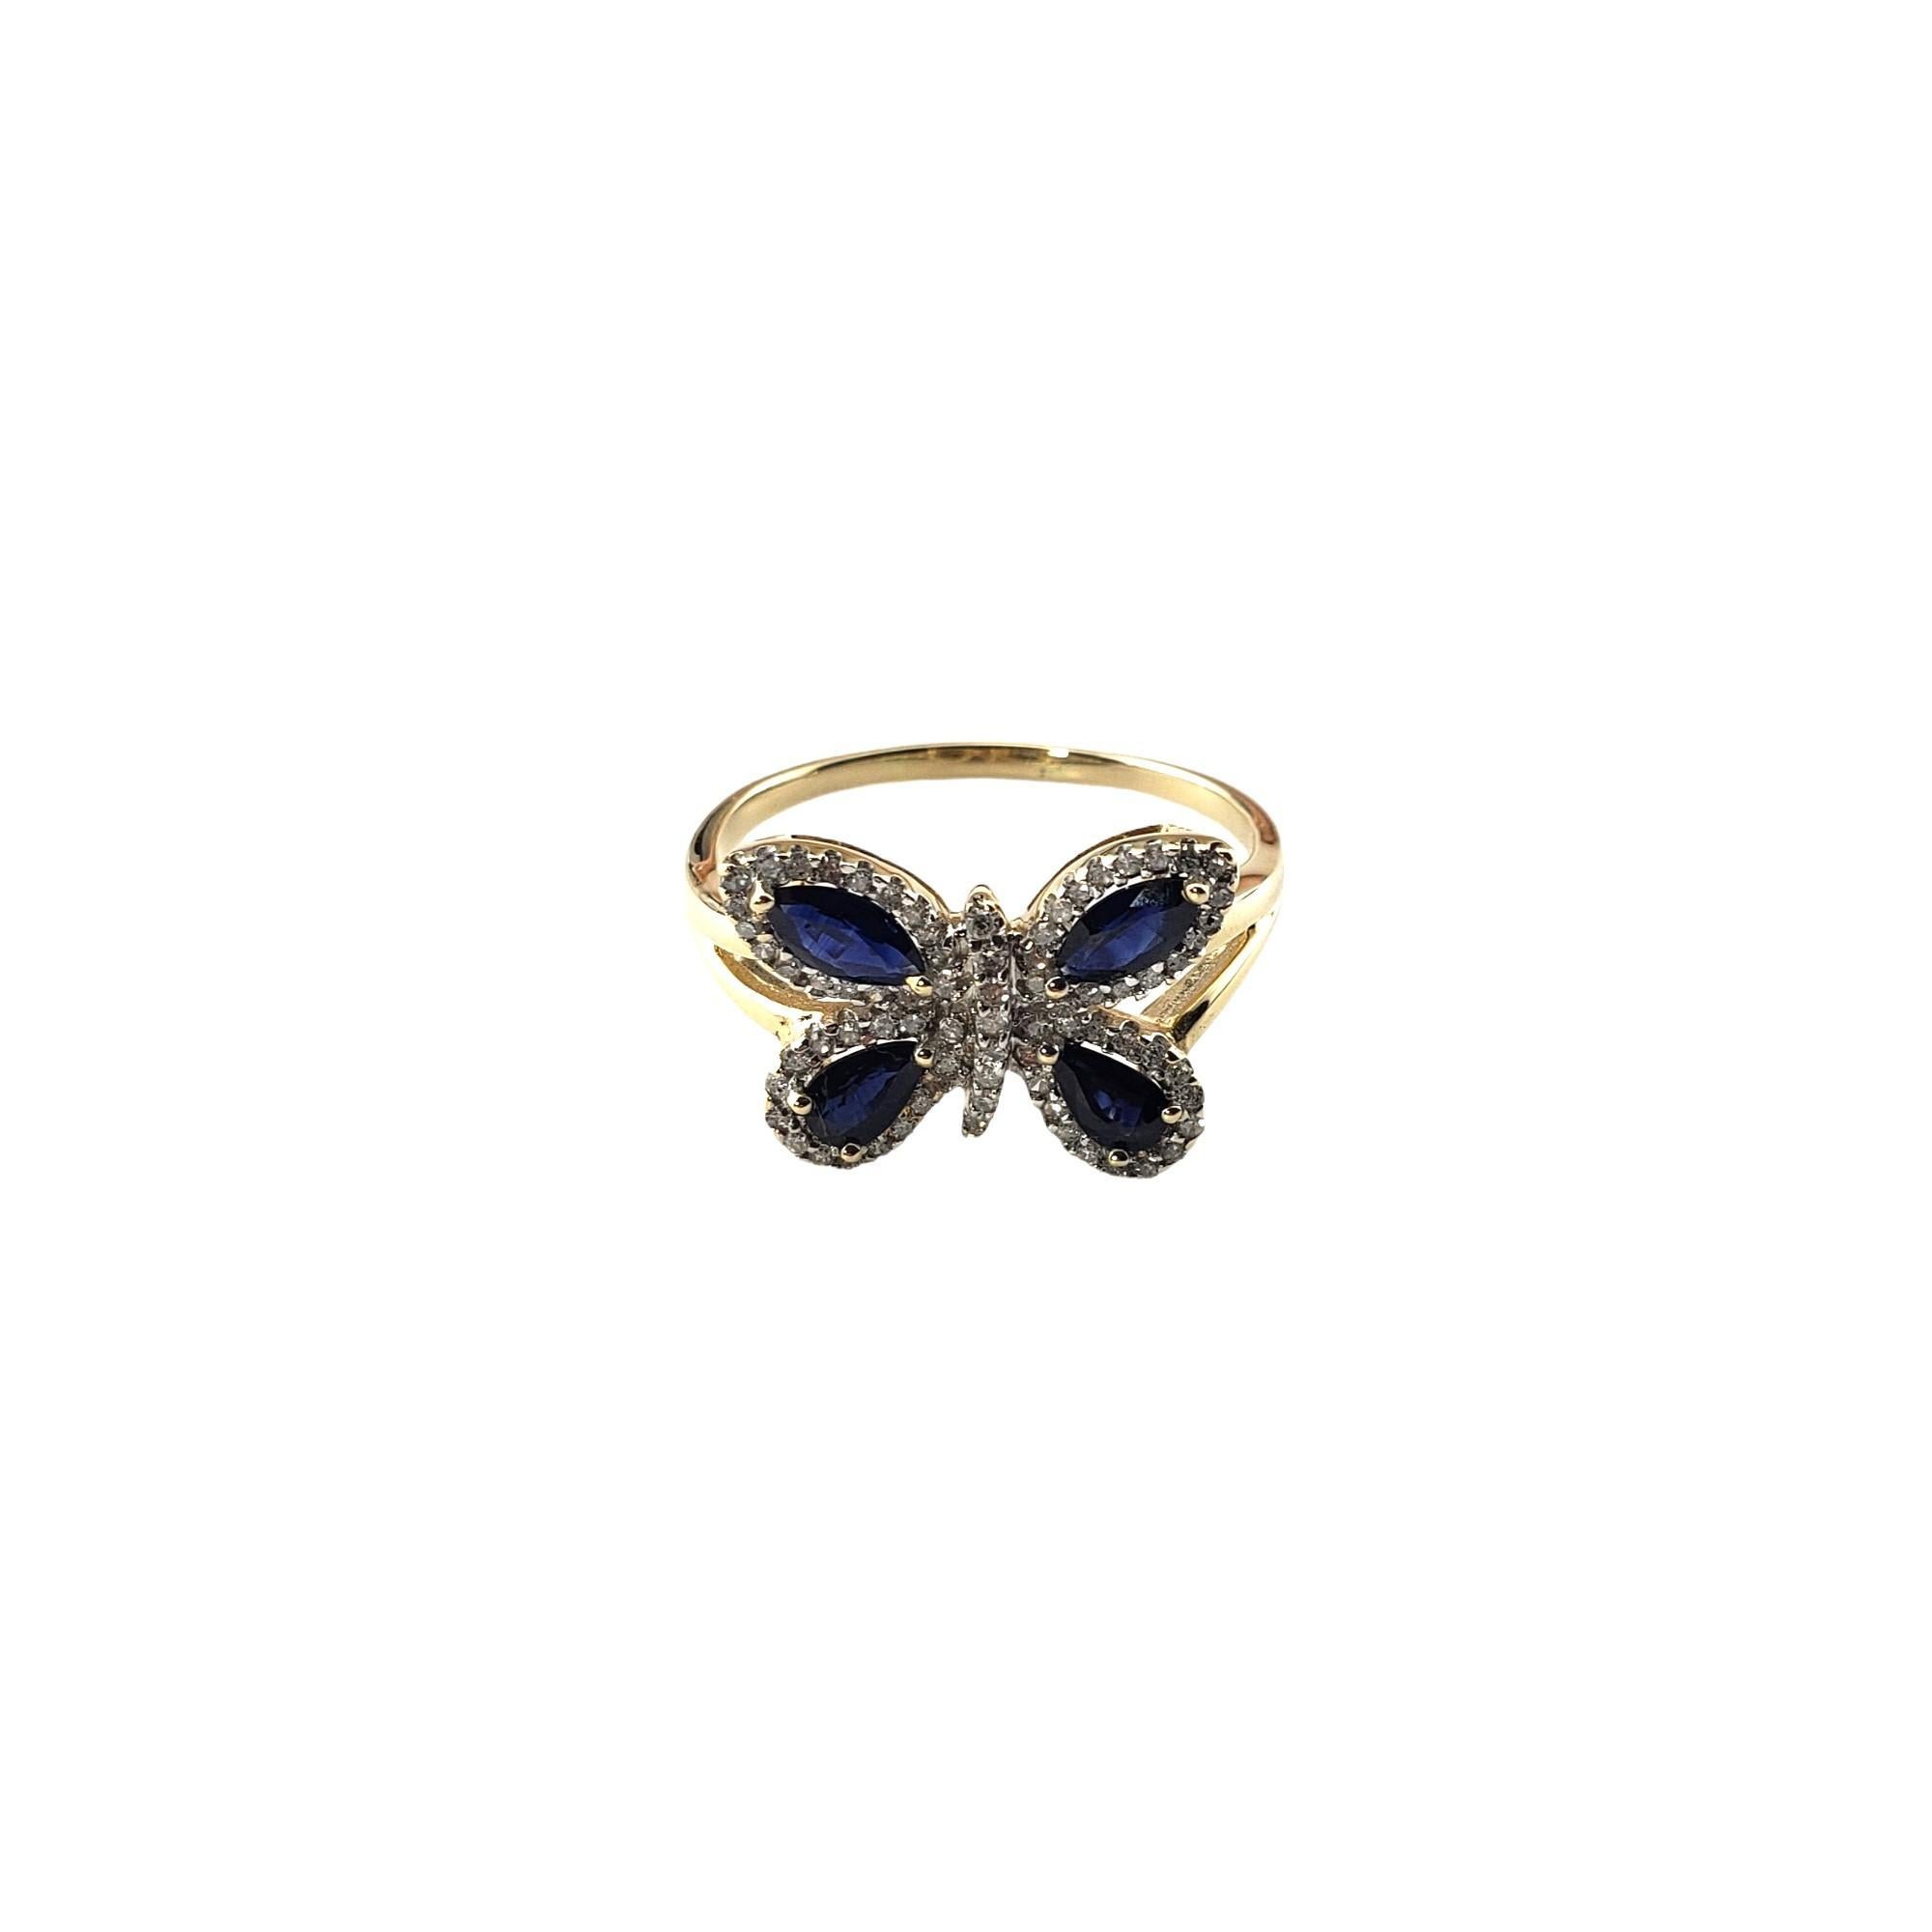 Vintage 14 Karat Yellow Gold Sapphire and Diamond Butterfly Ring Size 9.5 JAGi Certified-

This lovely butterfly ring features two marquise sapphires (5.6 mm x 2.8 mm), two pear cut sapphires (4 mm x 3 mm), and 74 round single cut diamonds set in